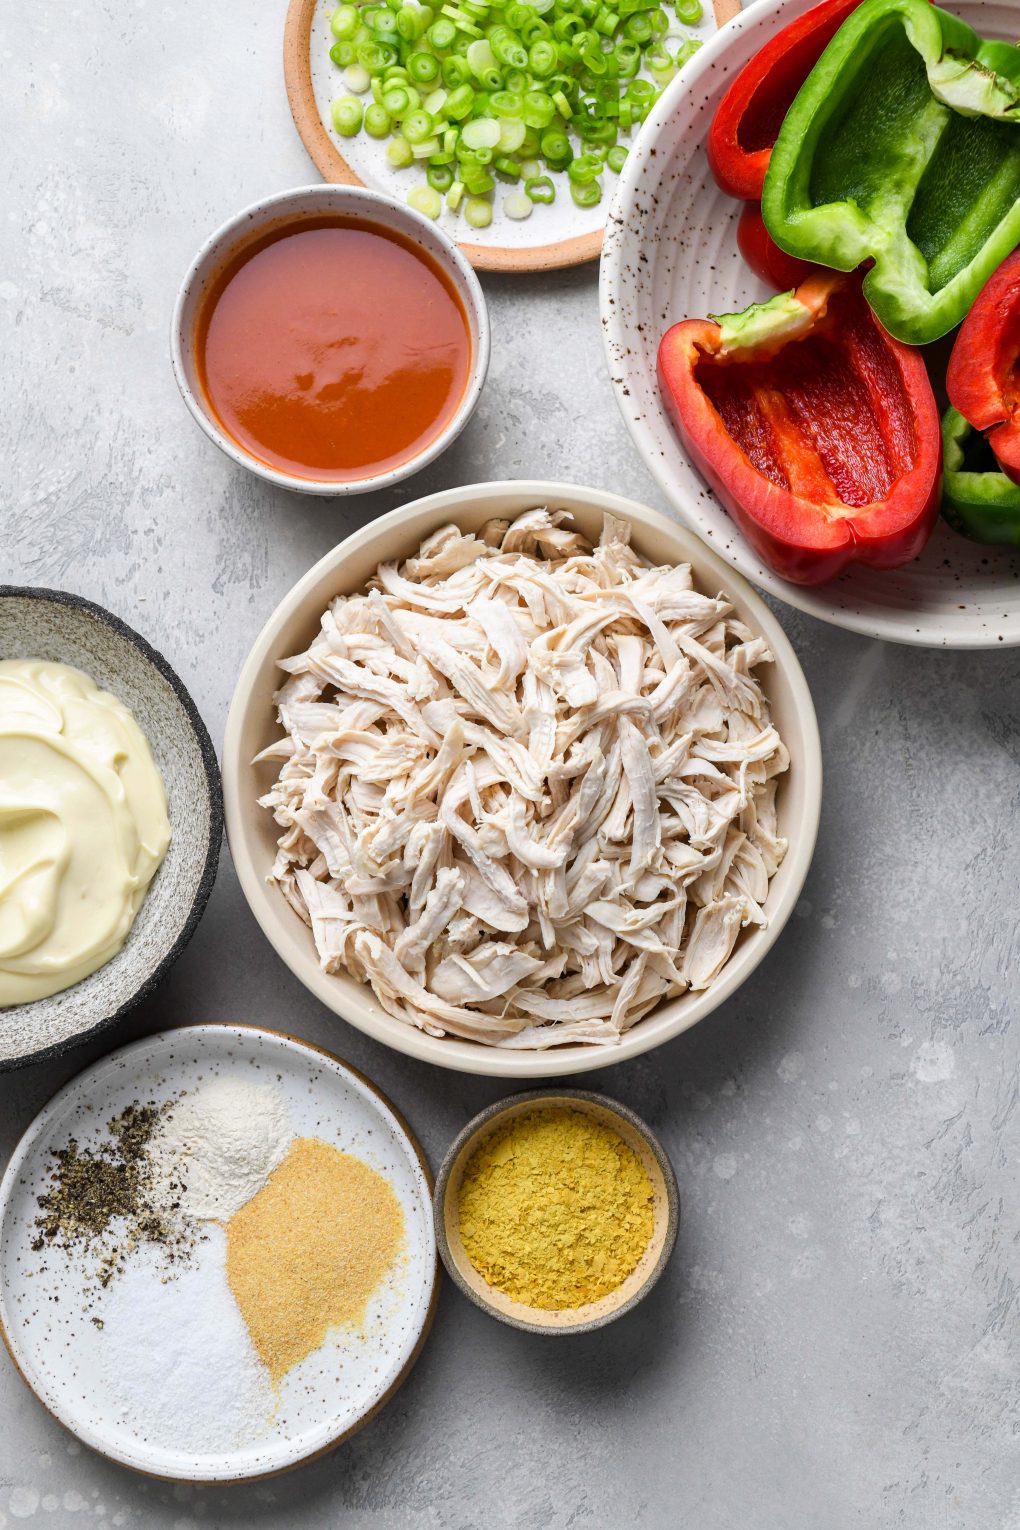 An image of ingredients used to make buffalo chicken stuffed peppers in various bowls and plates, on a light grey colored background. Shredded chicken, cut and de-seeded bell peppers, hot sauce, mayonnaise, spices, herbs, and green onions. 